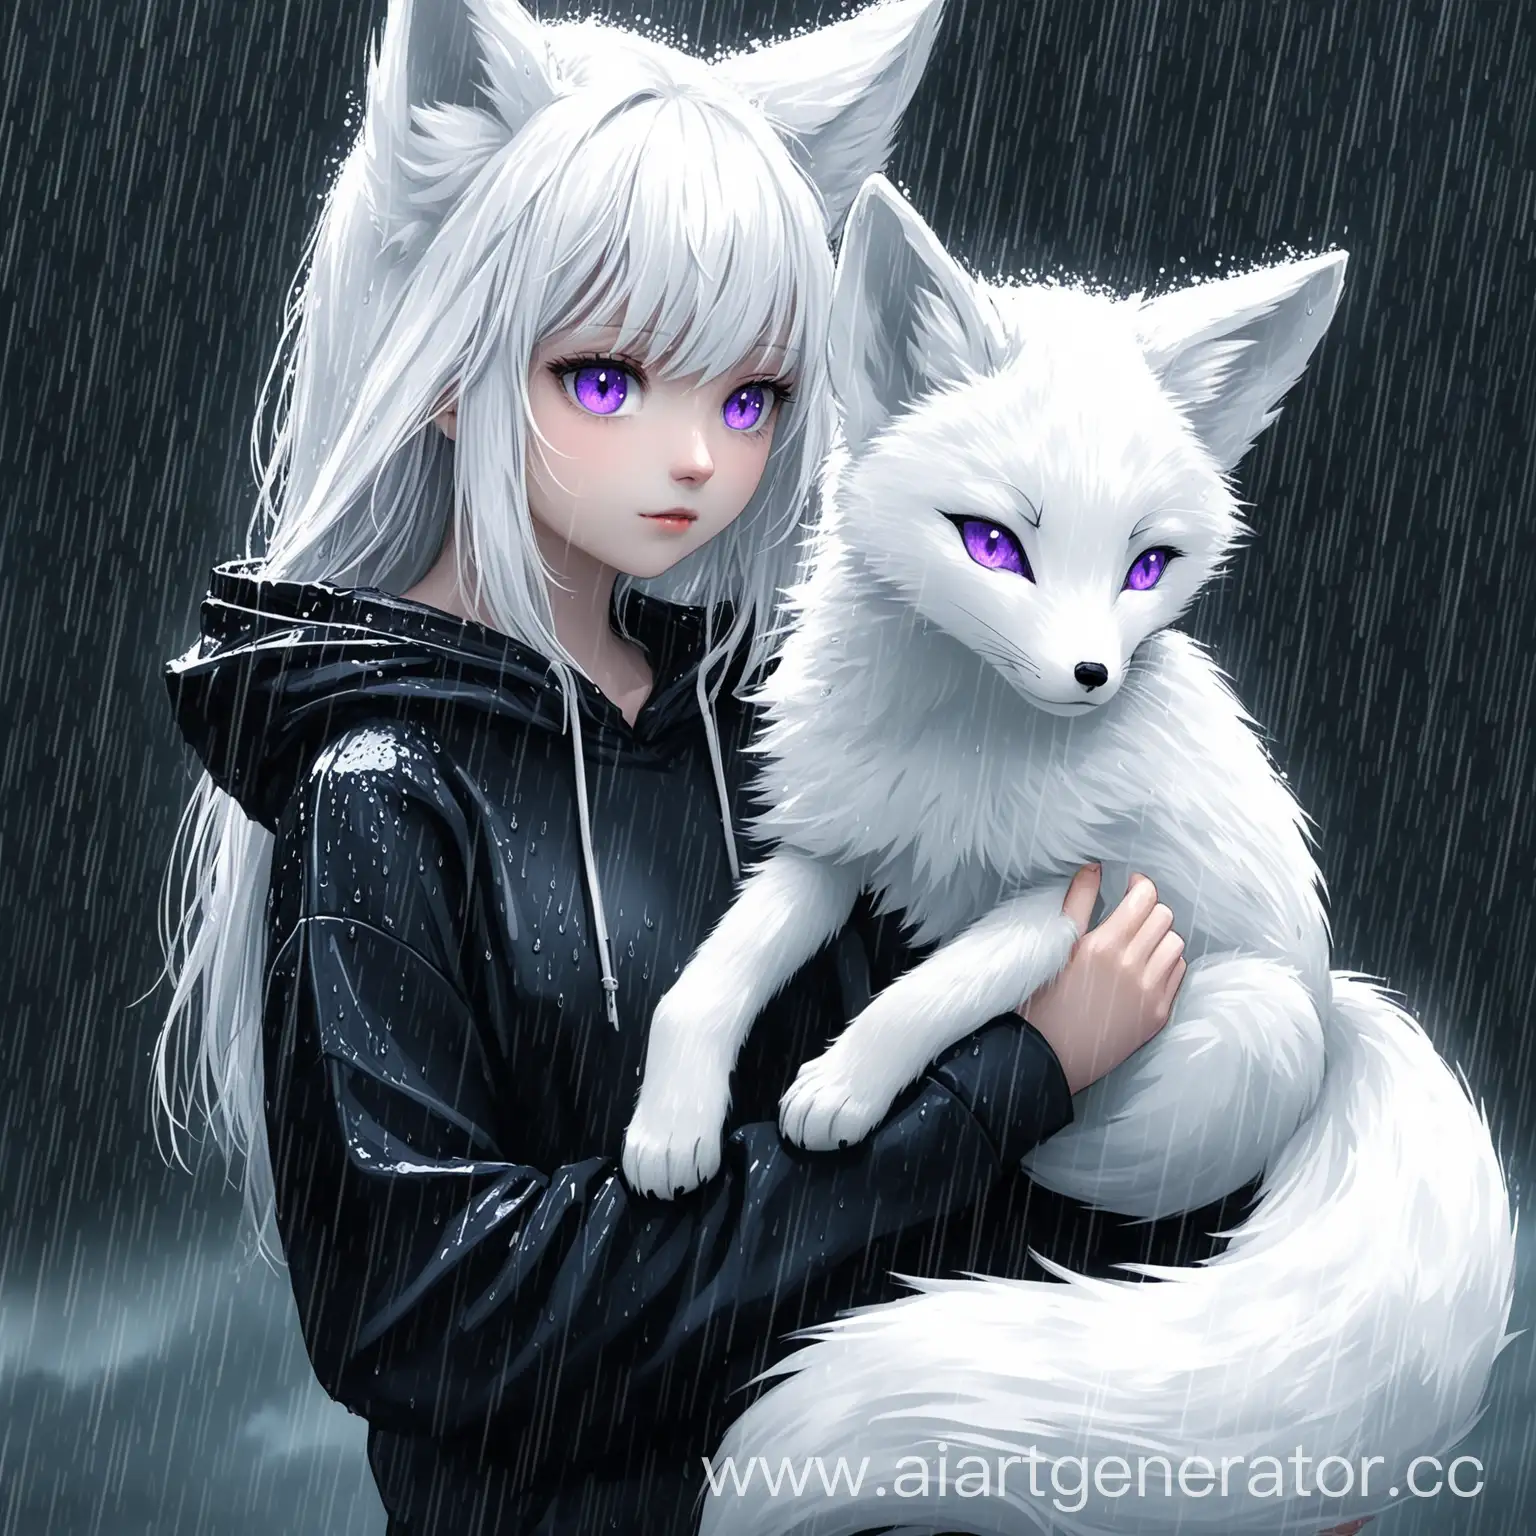 WhiteHaired-Girl-with-Fox-Features-and-Cub-in-Rain